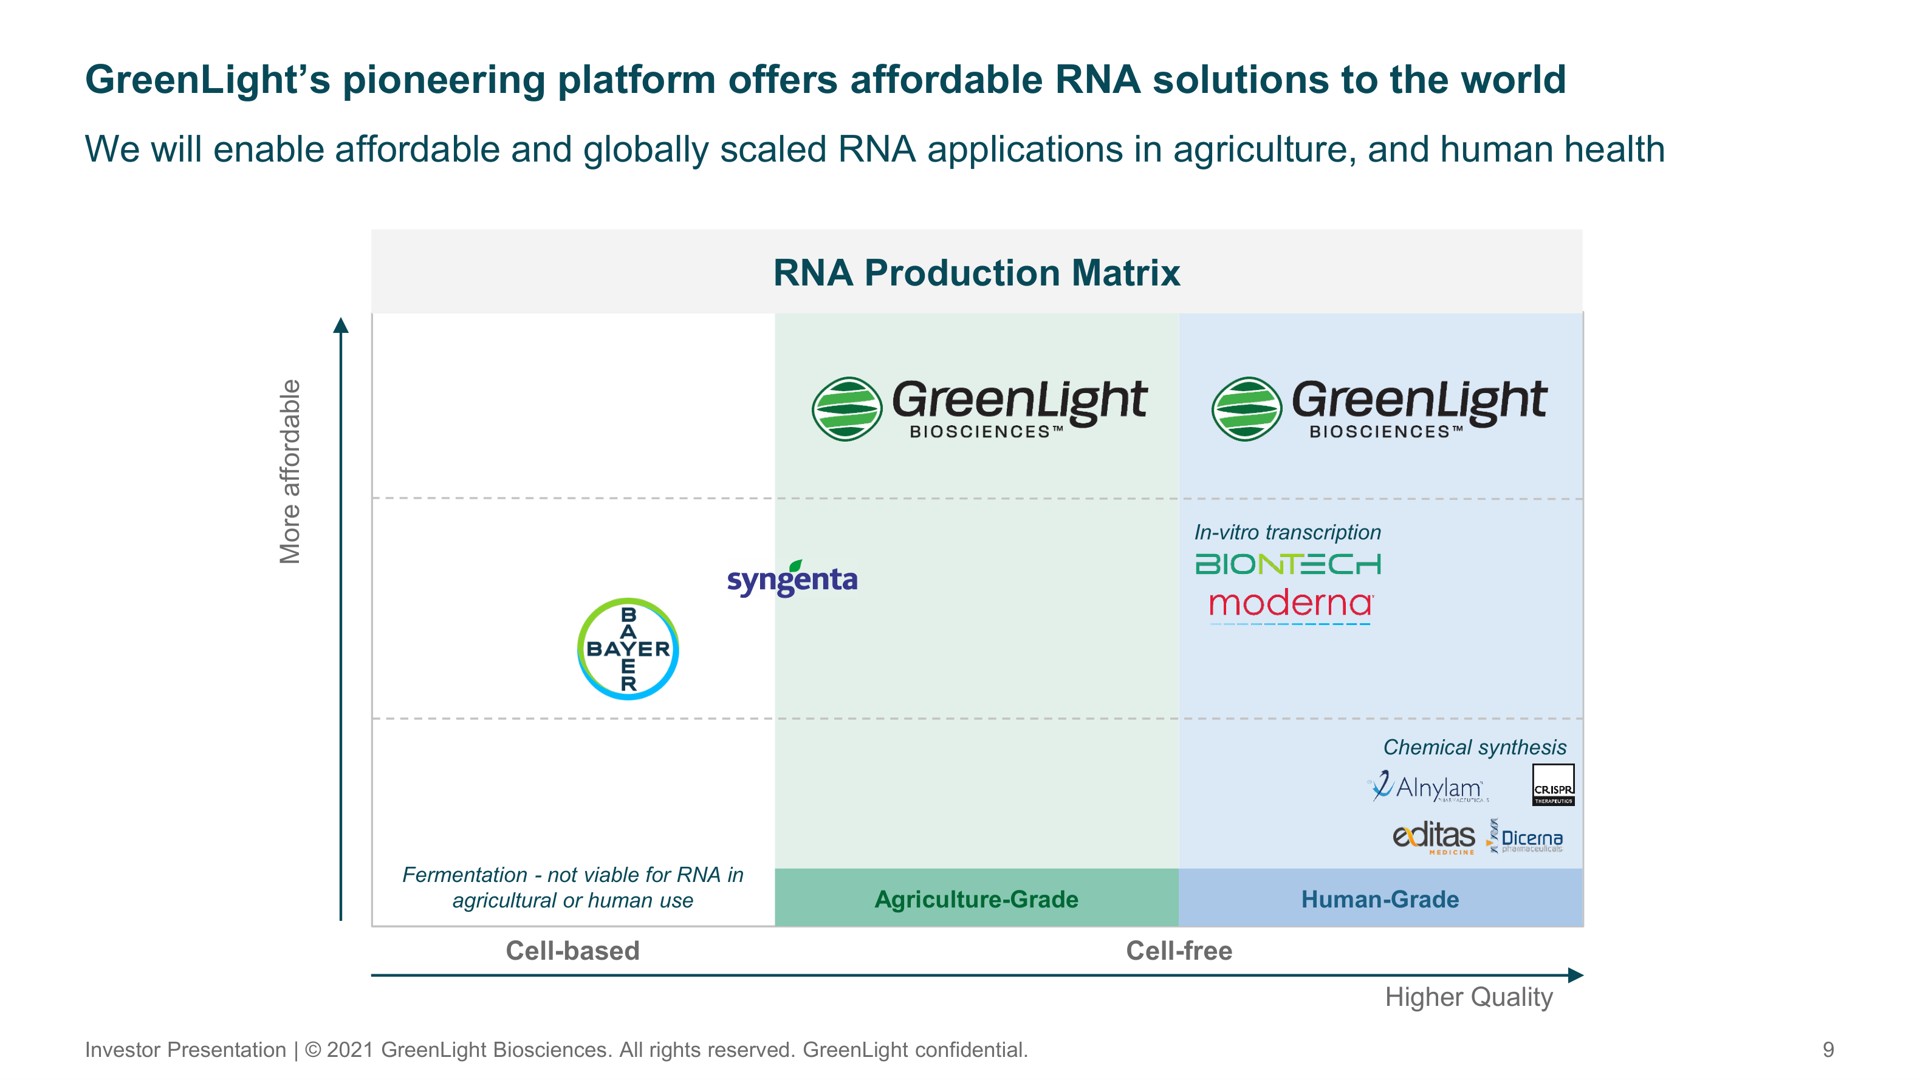 pioneering platform offers affordable solutions to the world we will enable affordable and globally scaled applications in agriculture and human health production matrix aged | GreenLight